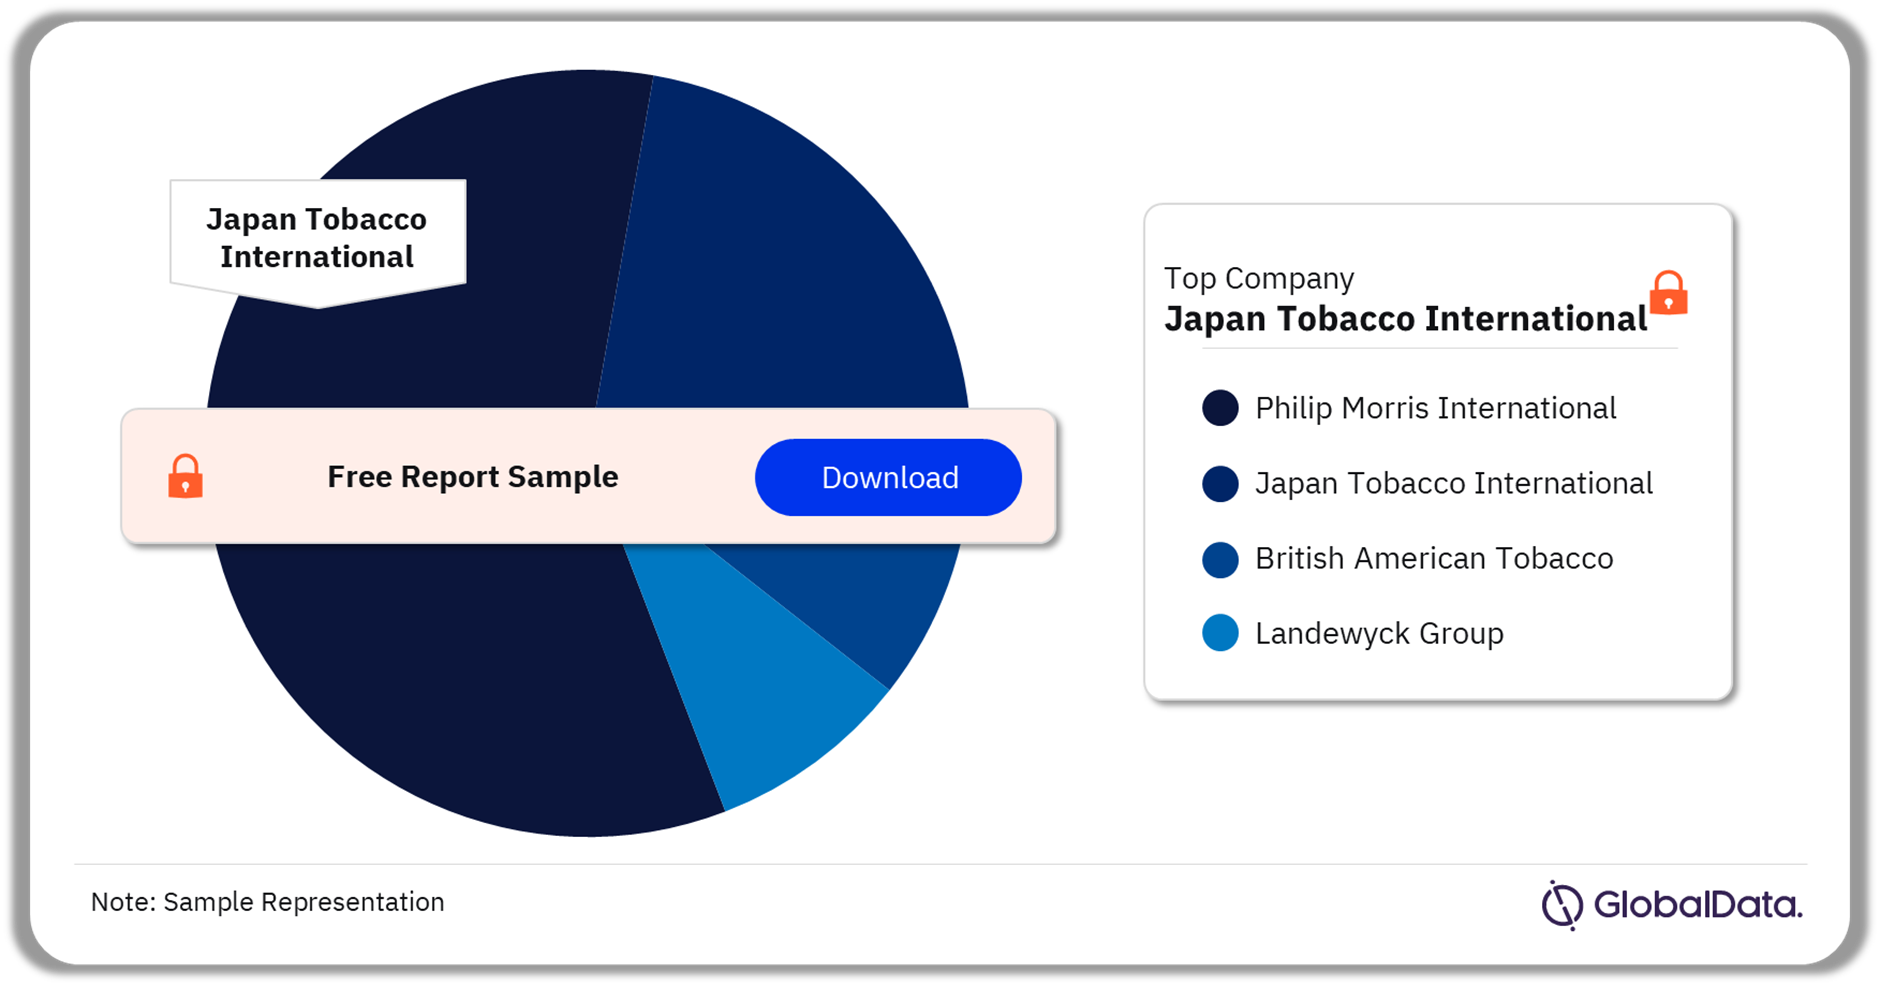 Sweden Cigarettes Market Analysis by Companies, 2022 (%)